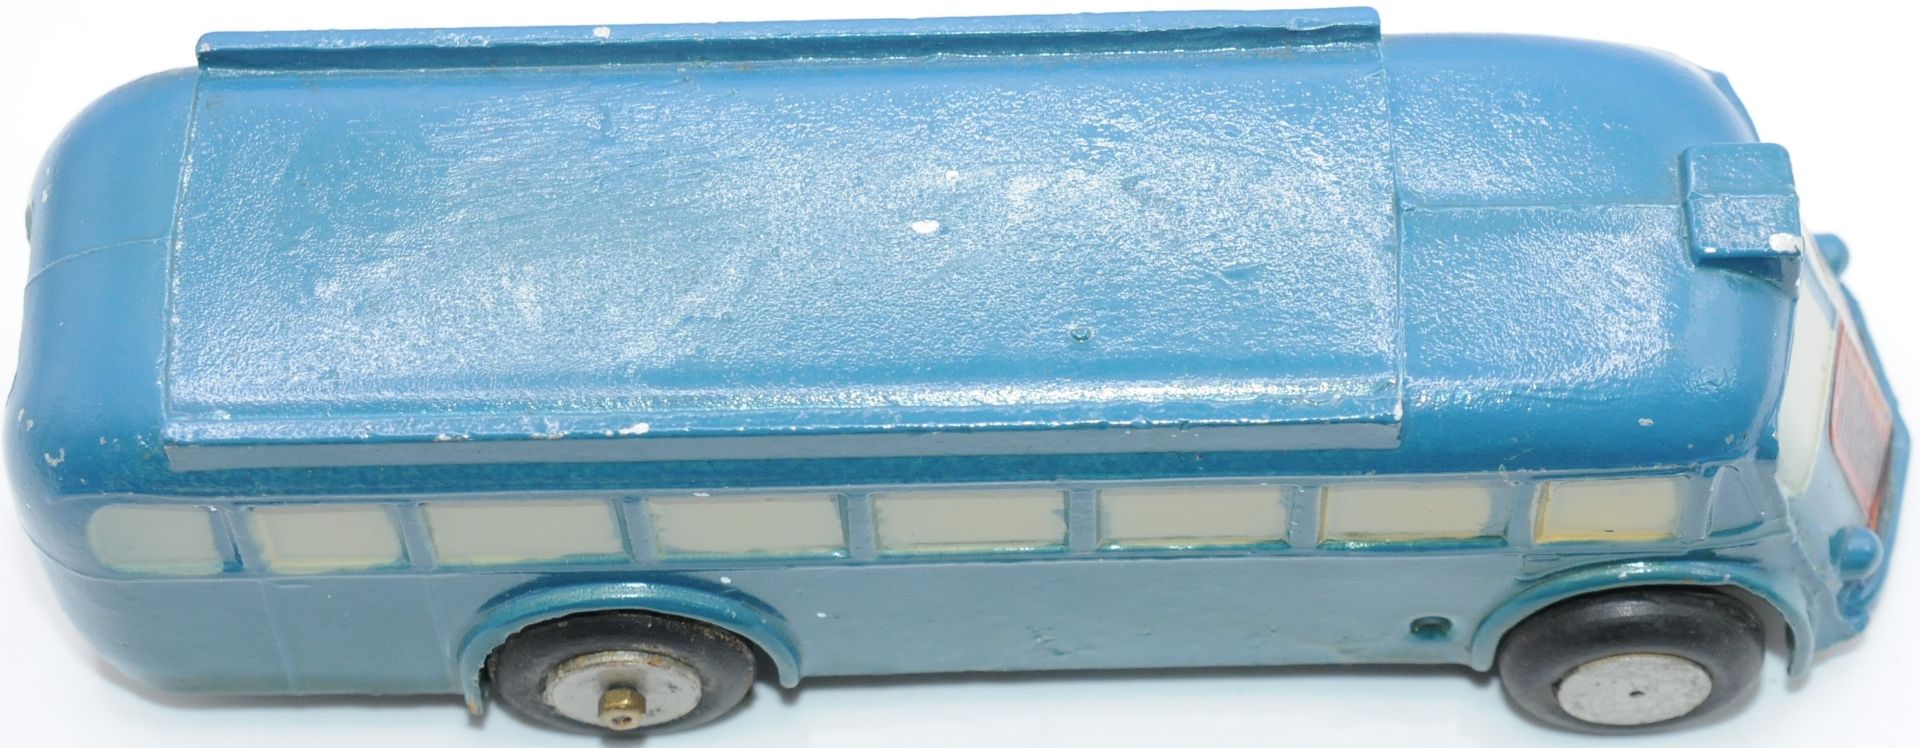 Gulliver Model a boxed Berliet Single-deck bus - Image 3 of 3